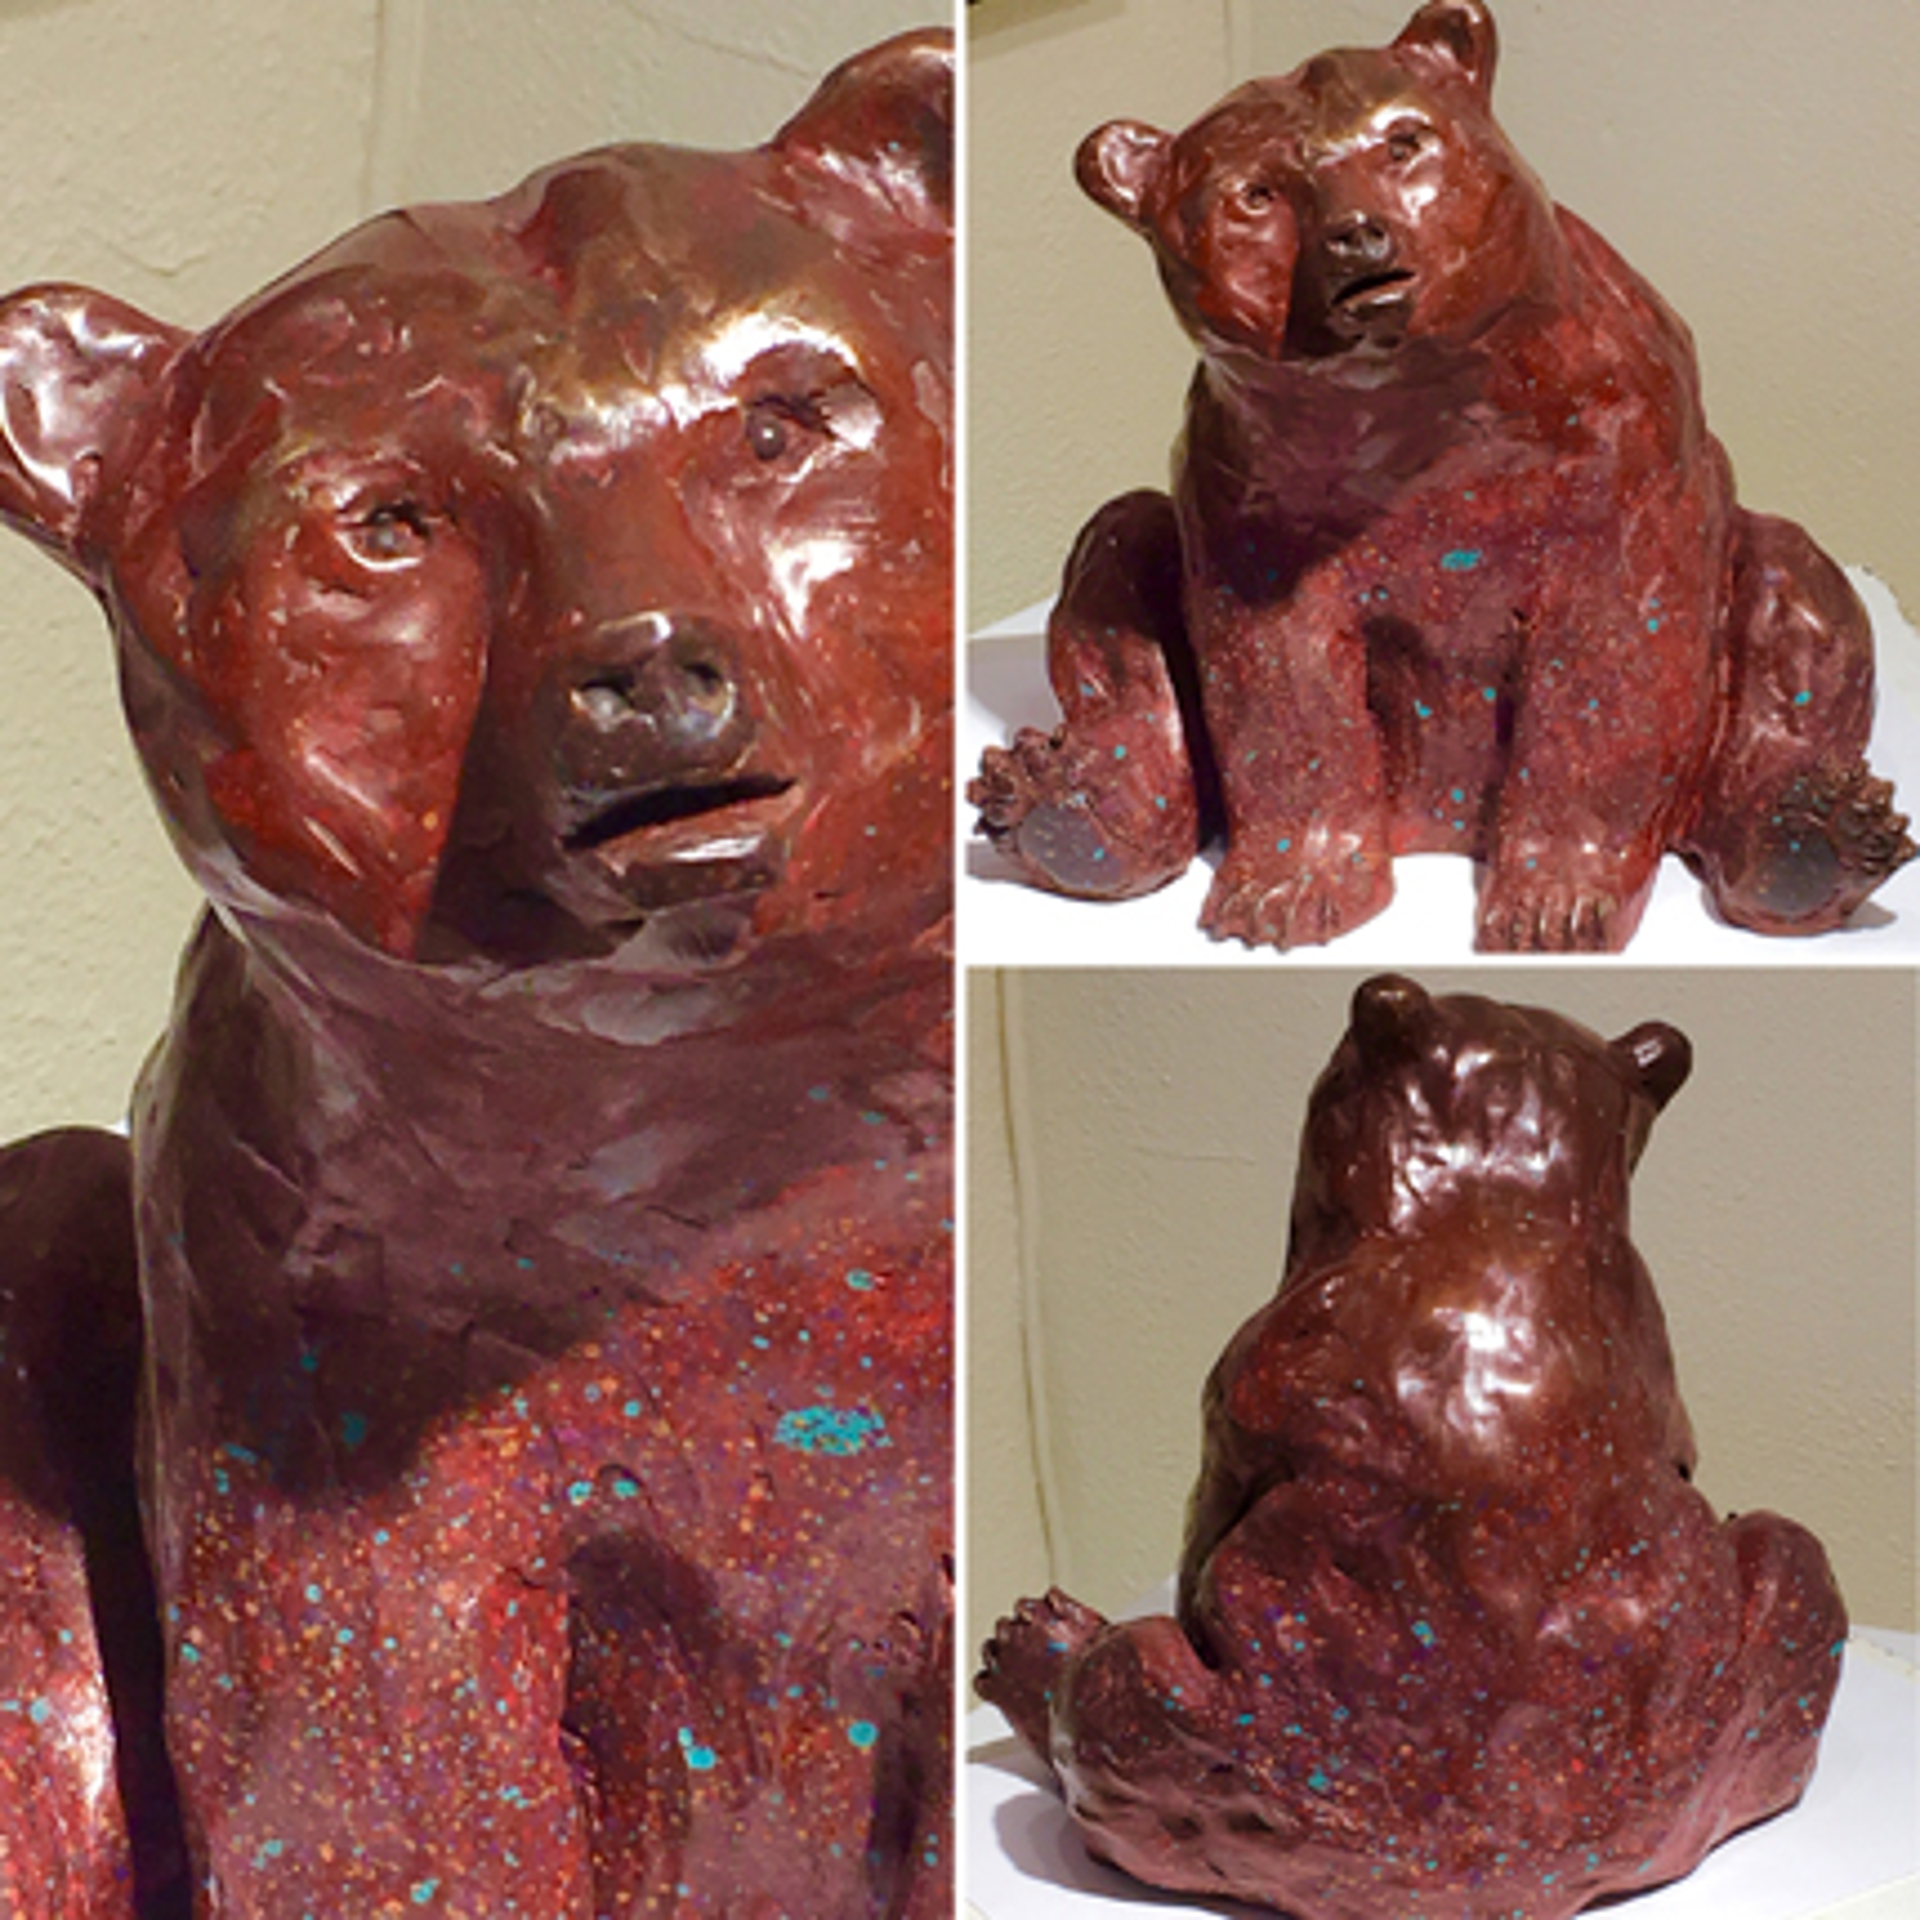 Stumped ~ Barbara has captured all the wonderful things we love about bears - round paws, full cheeks, and a puzzled look. If only he could figure out how to get to that honey! A limited-edition of 30, each bronze has a custom color patina finished by Barb by Barbara Meikle